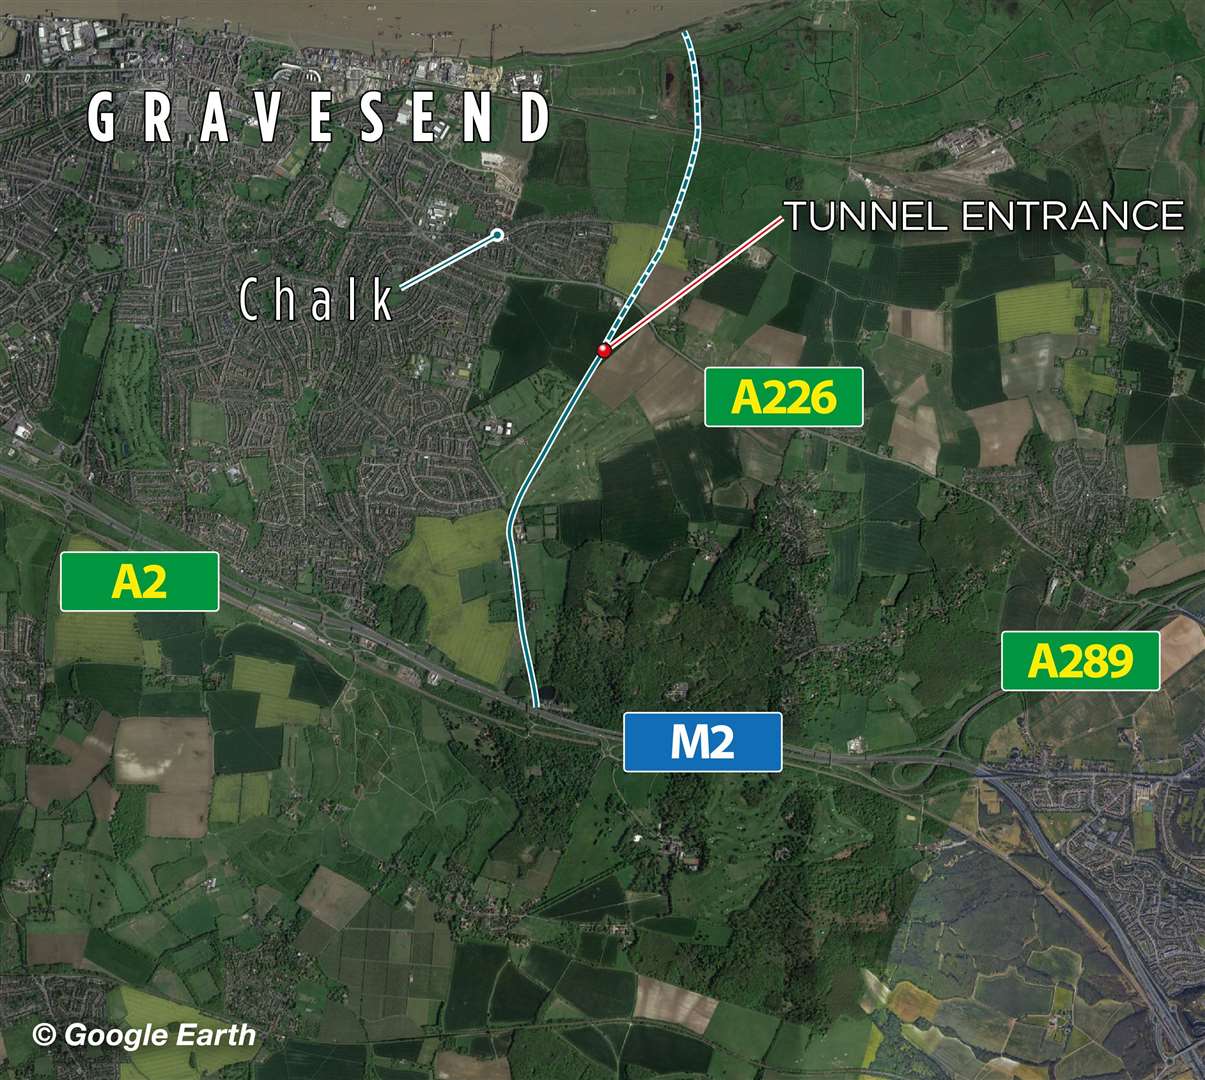 The updated planned route of the Lower Thames Crossing